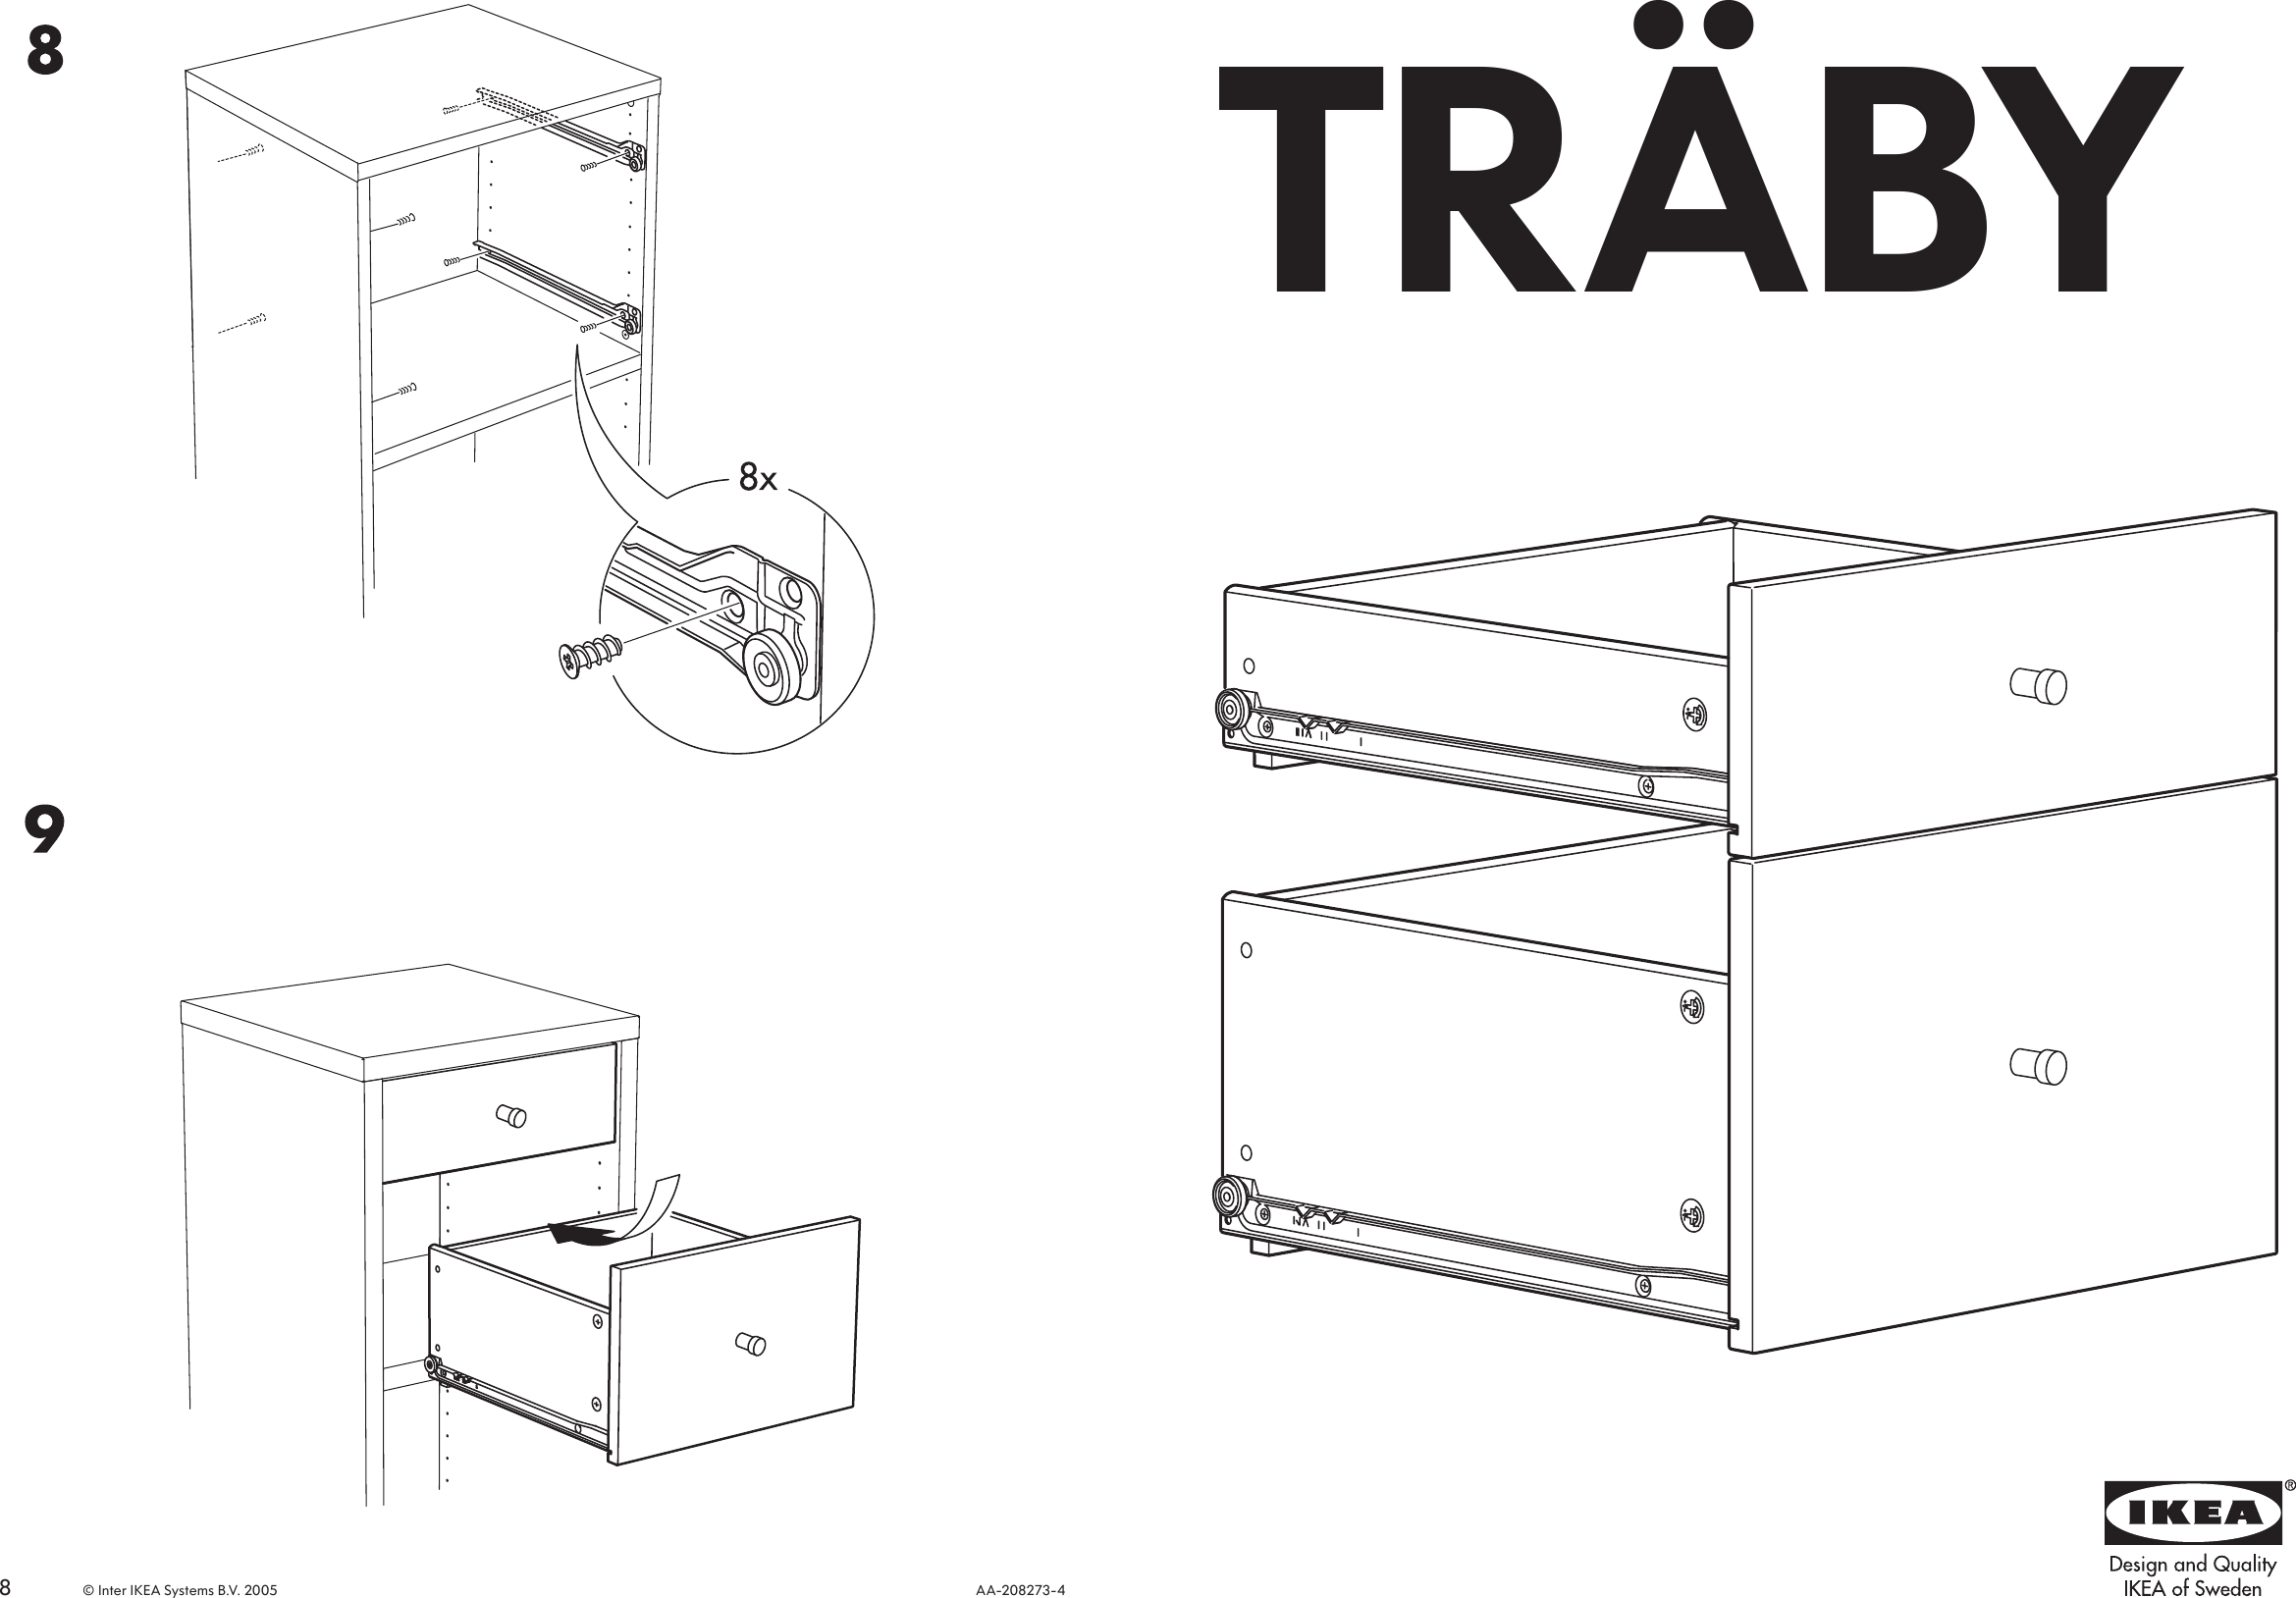 Page 1 of 4 - Ikea Ikea-Traby-Drawer-13-3-4-2Pk-Assembly-Instruction